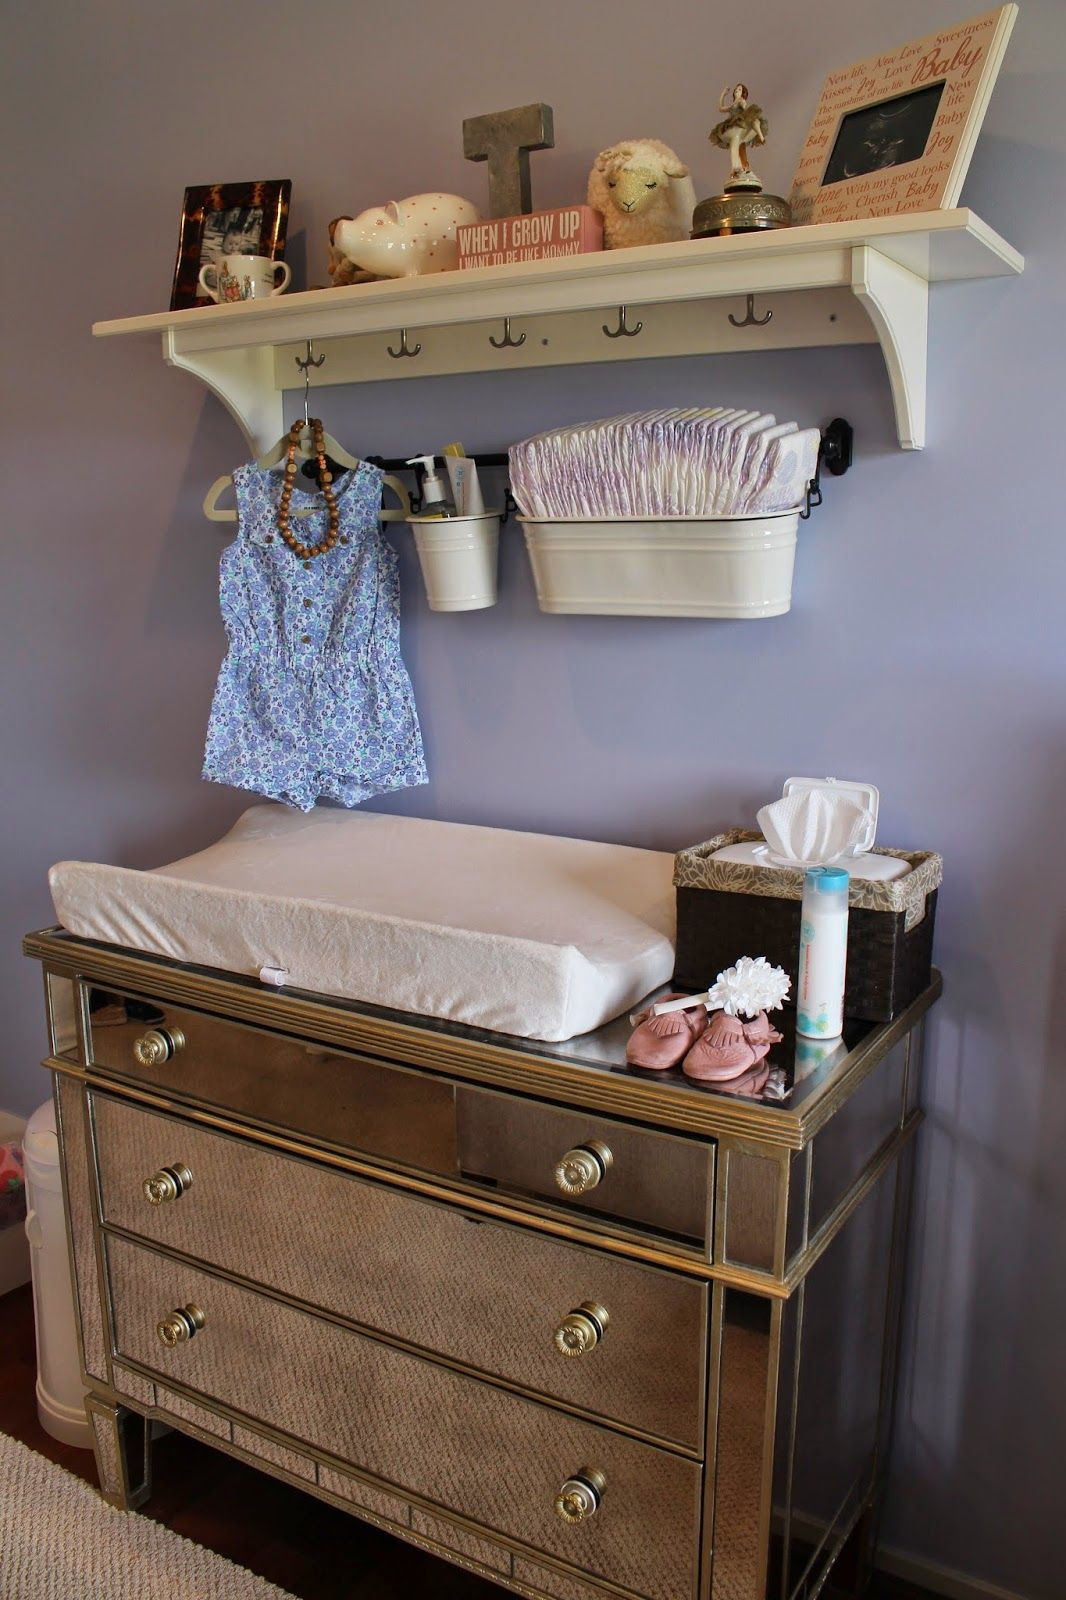 DIY Baby Changing Table
 Ikea Hack Nursery Changing Table